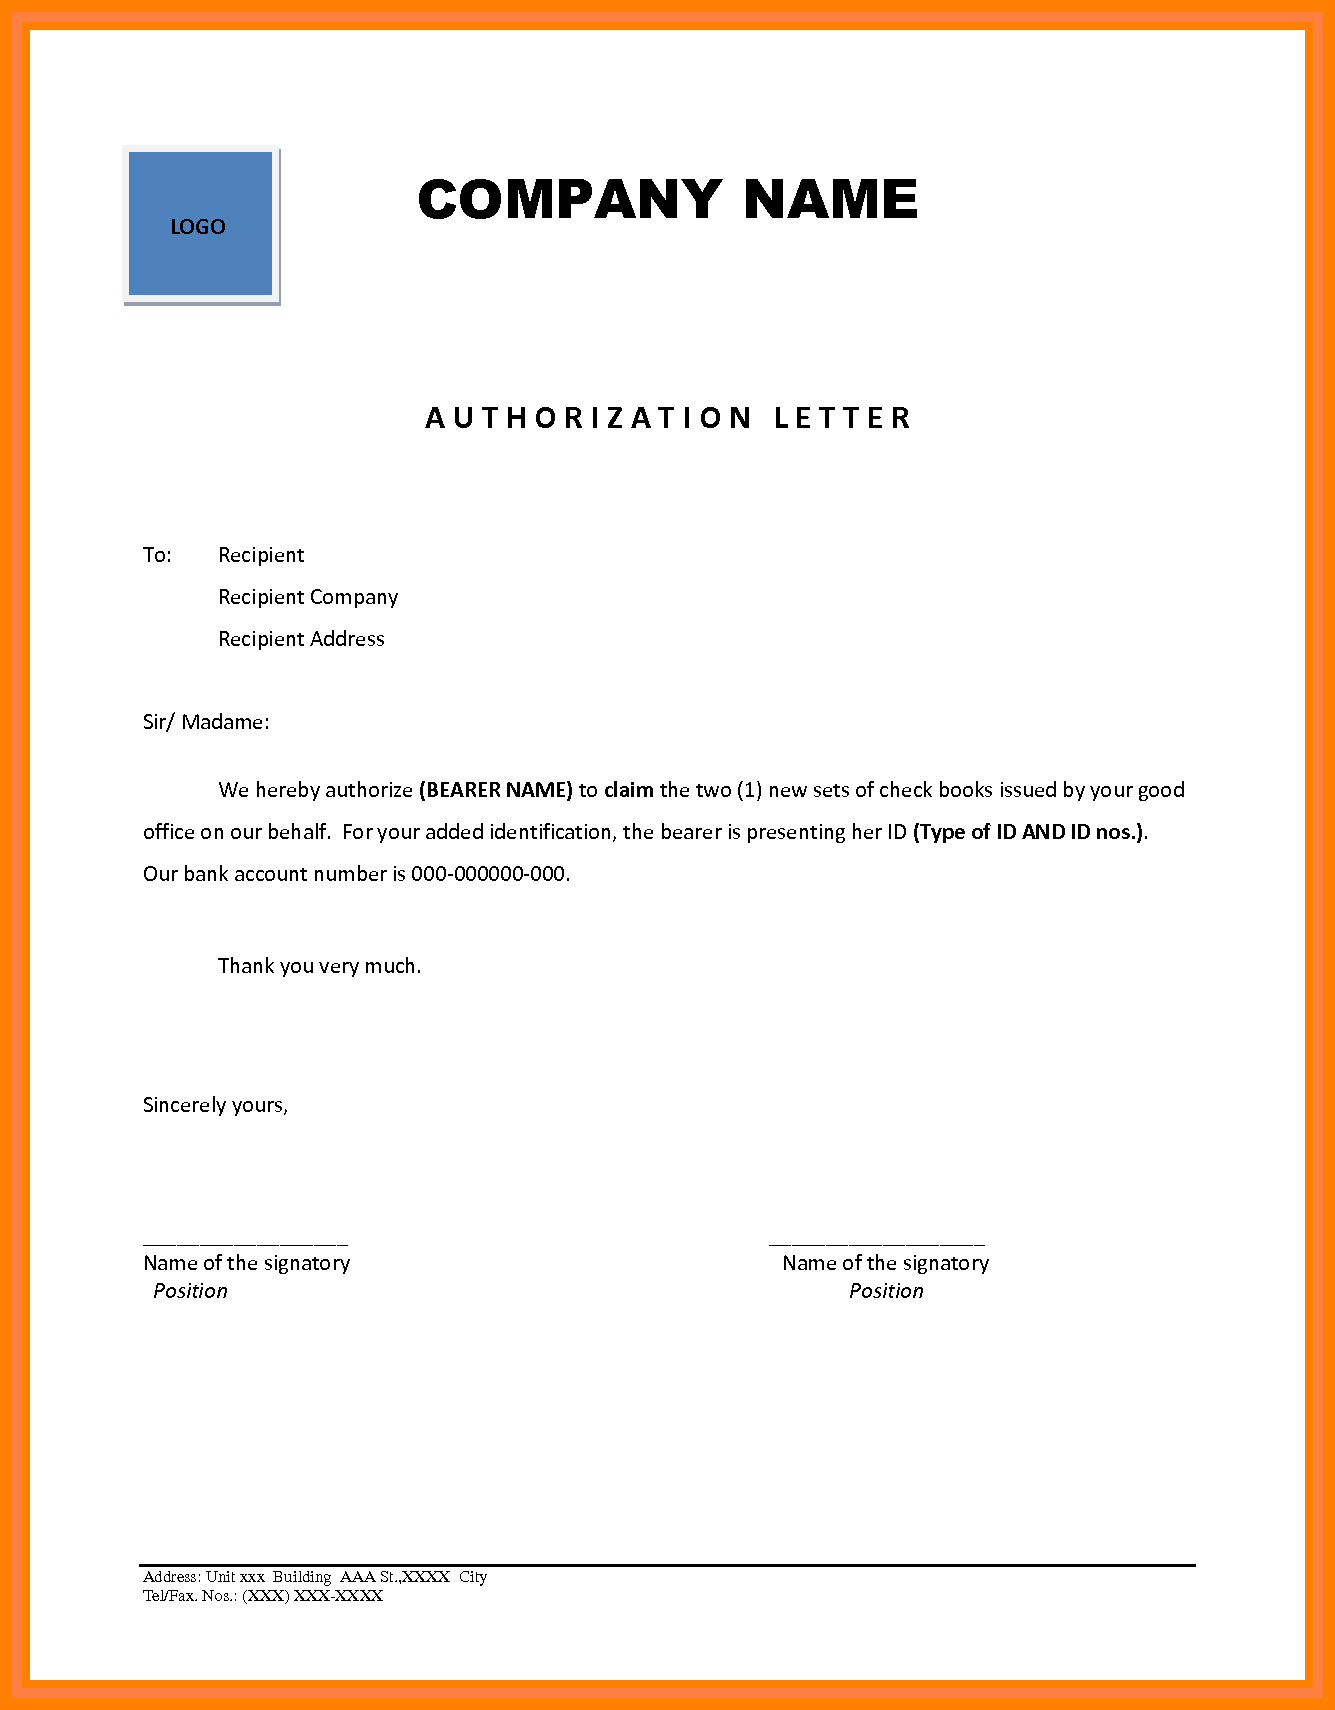 Authorization Letter | Business Mentor